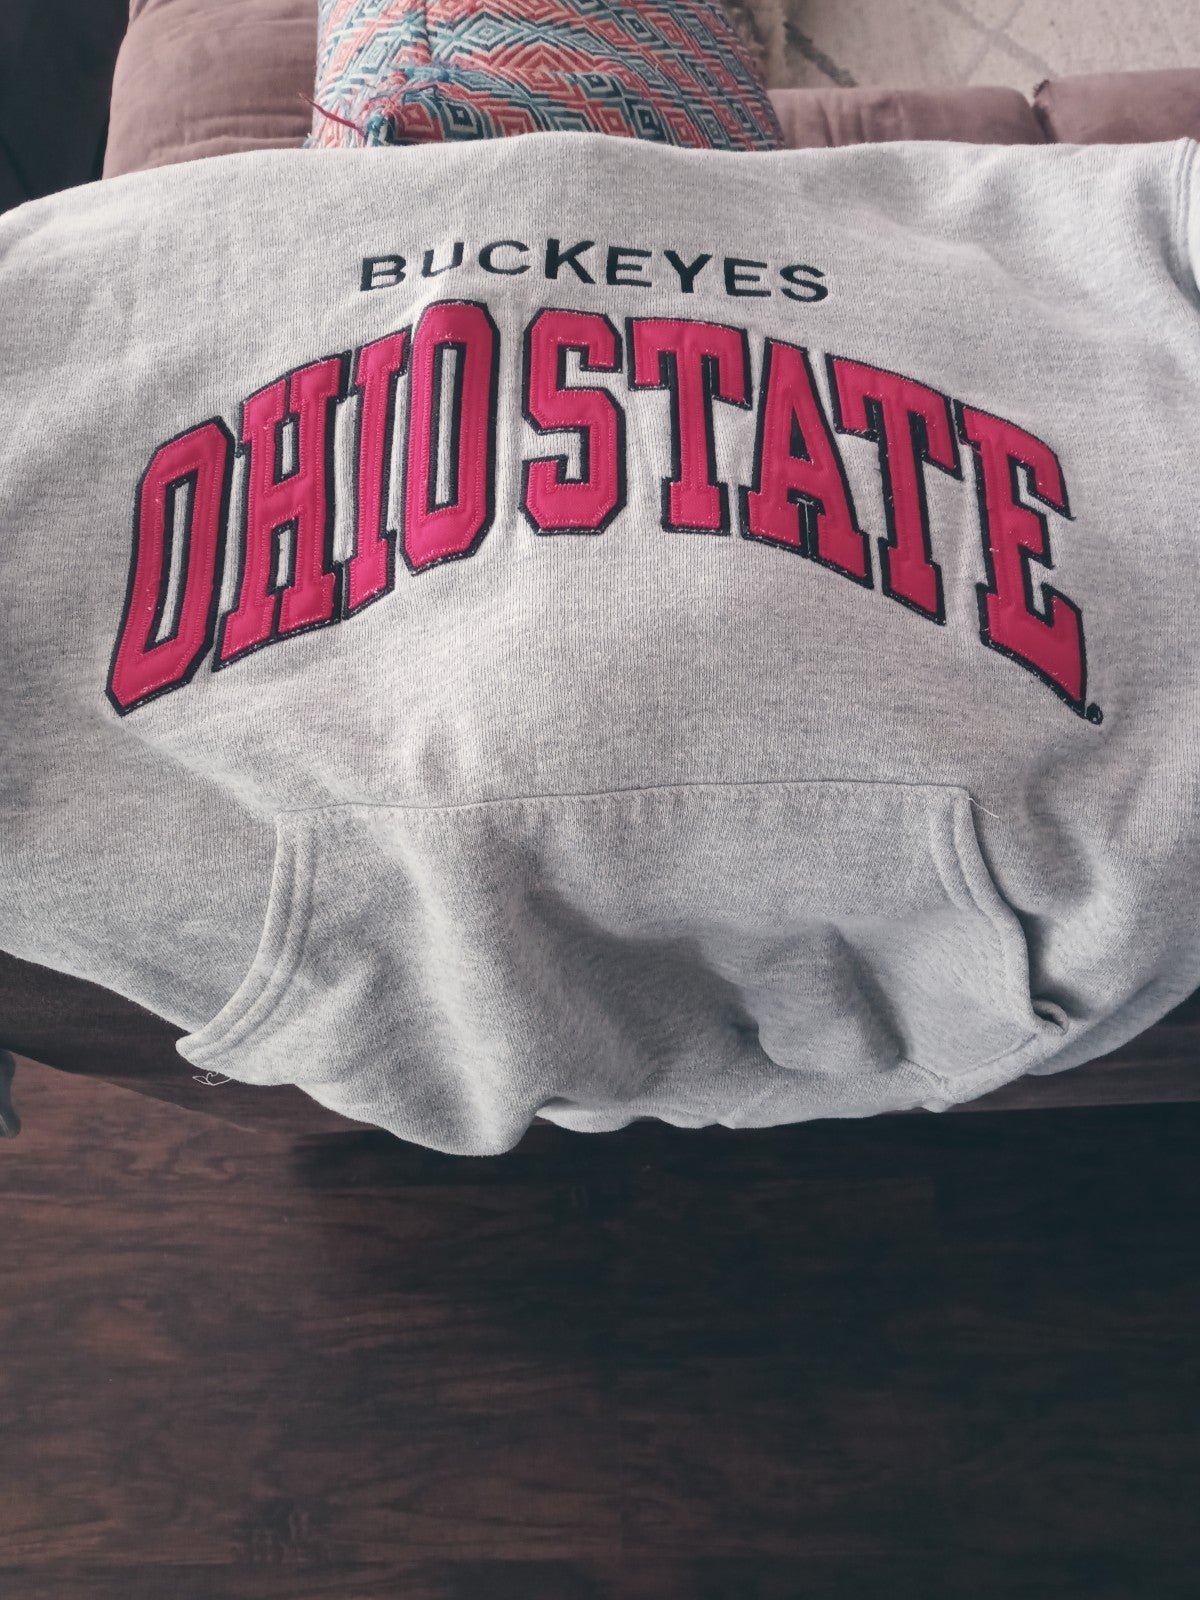 Promotions  Ohio State buckeyes hoodie gray size S LiYC